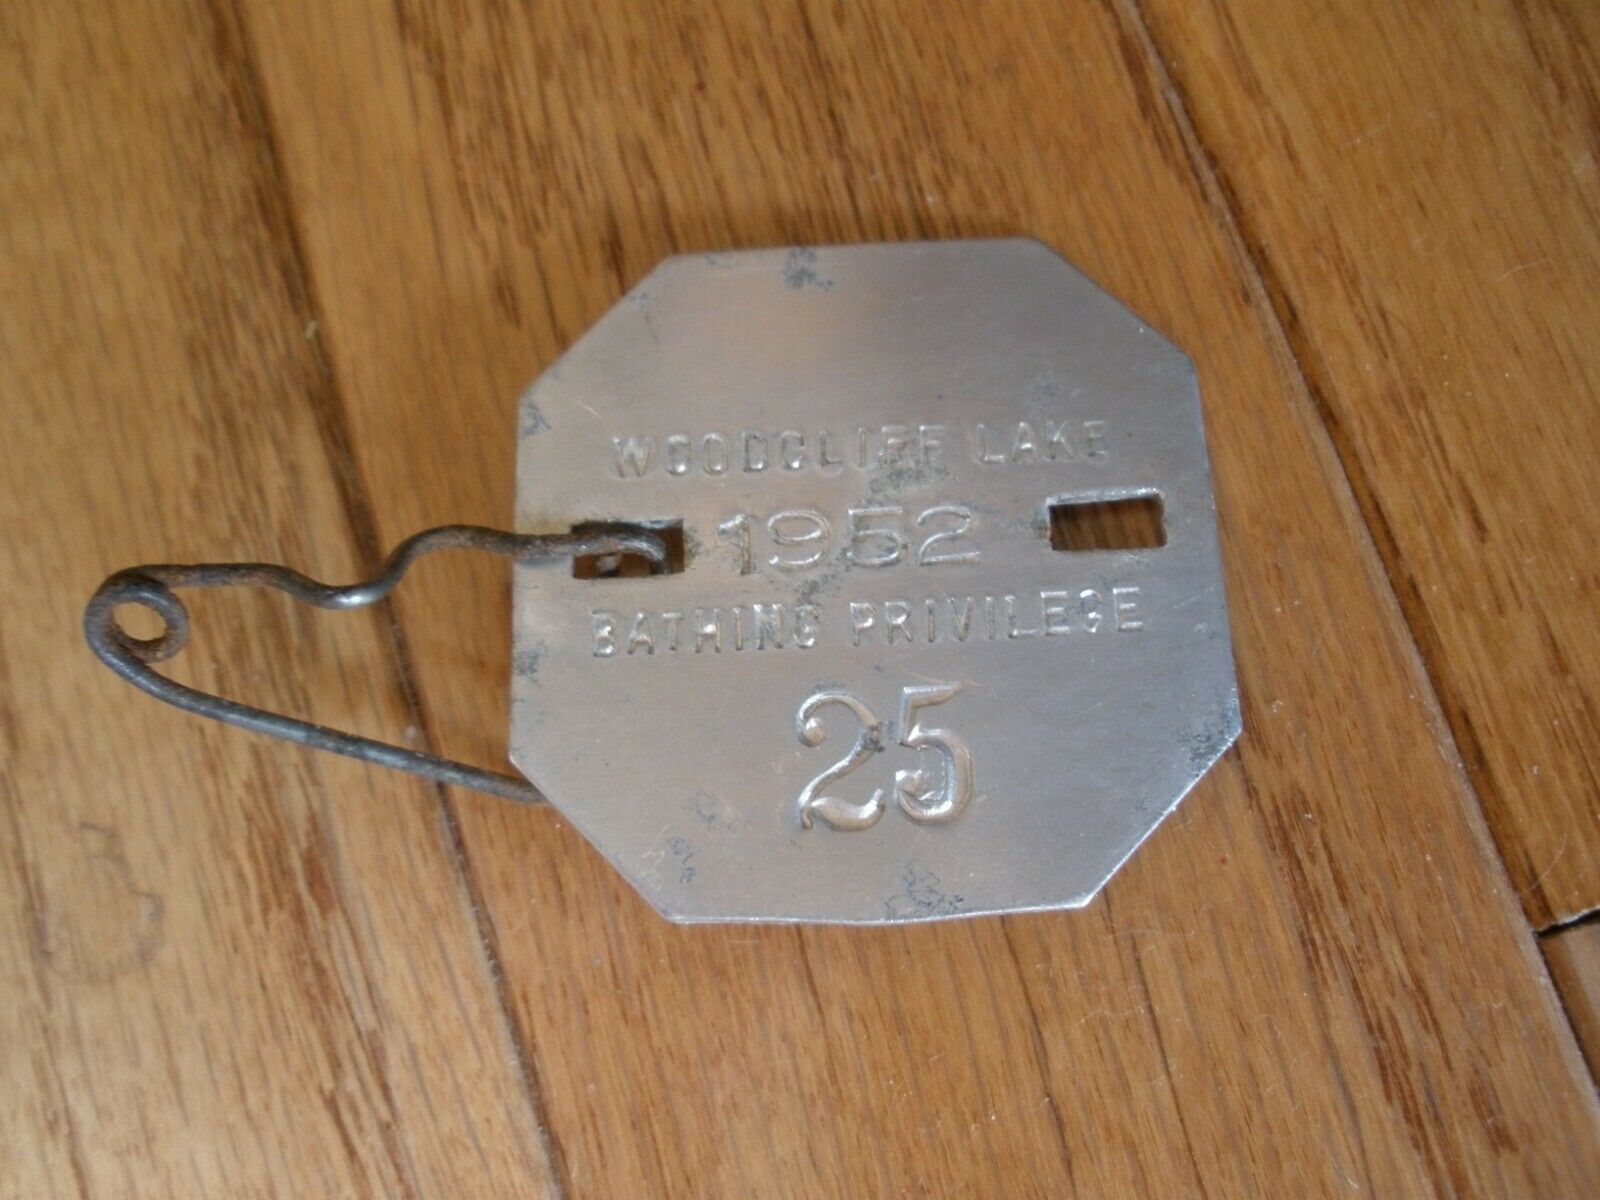 1950s Woodcliff Lake Metal Bathing Privilege Tag - New Jersey